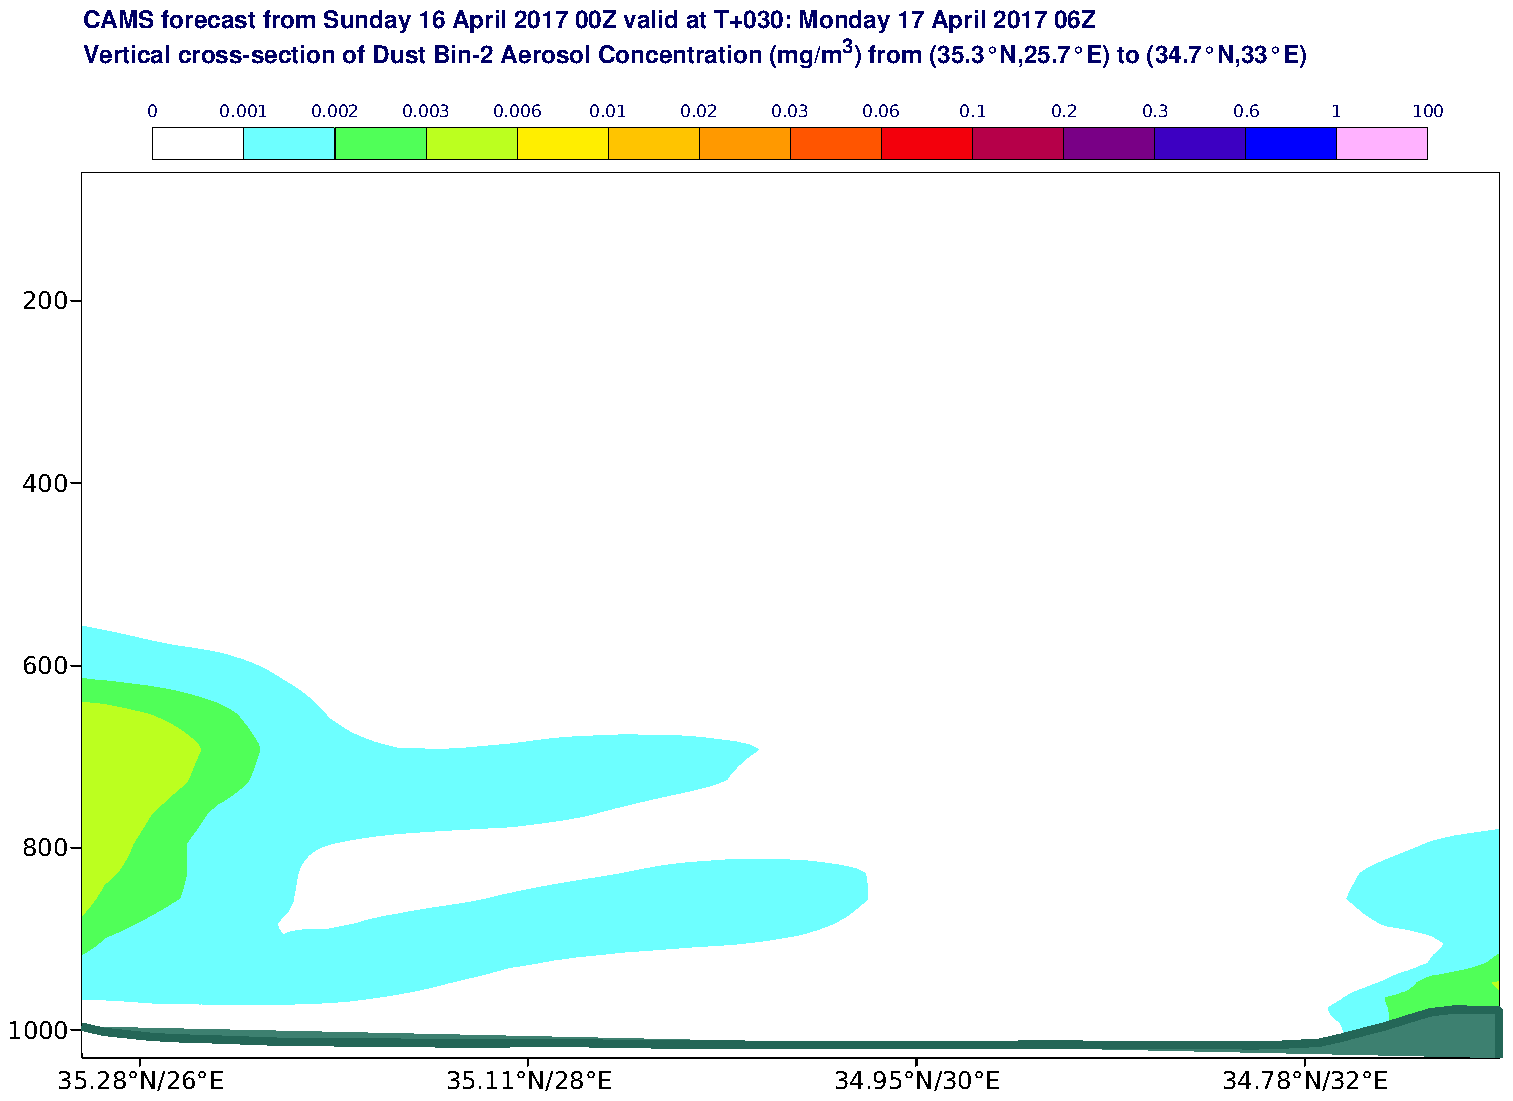 Vertical cross-section of Dust Bin-2 Aerosol Concentration (mg/m3) valid at T30 - 2017-04-17 06:00